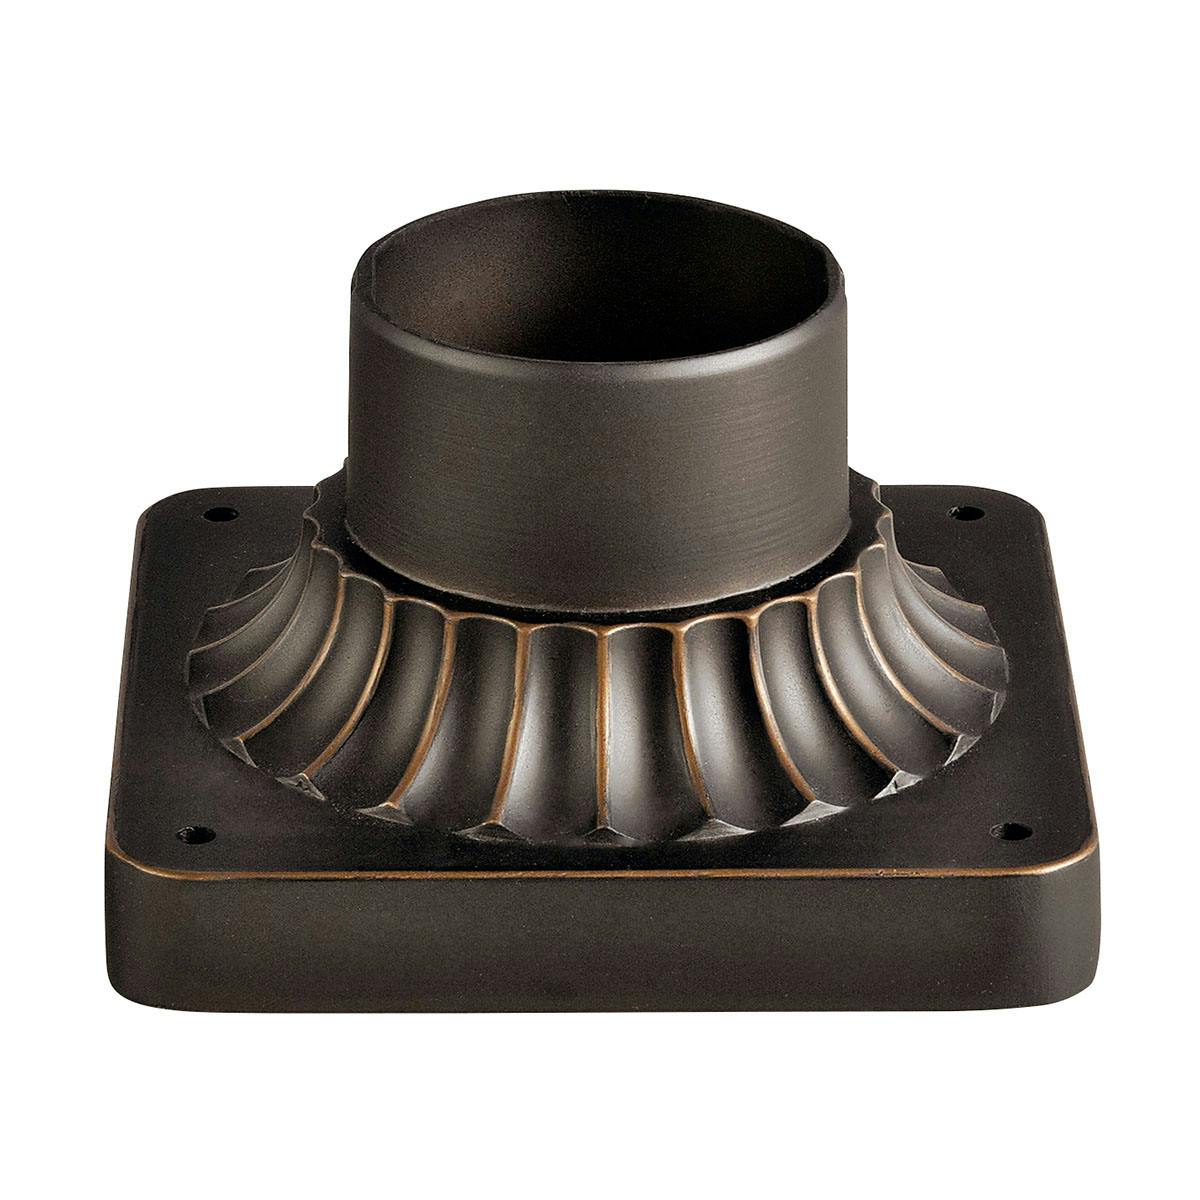 5.75" x 3.5" Pedestal Mount Rubbed Bronze on a white background